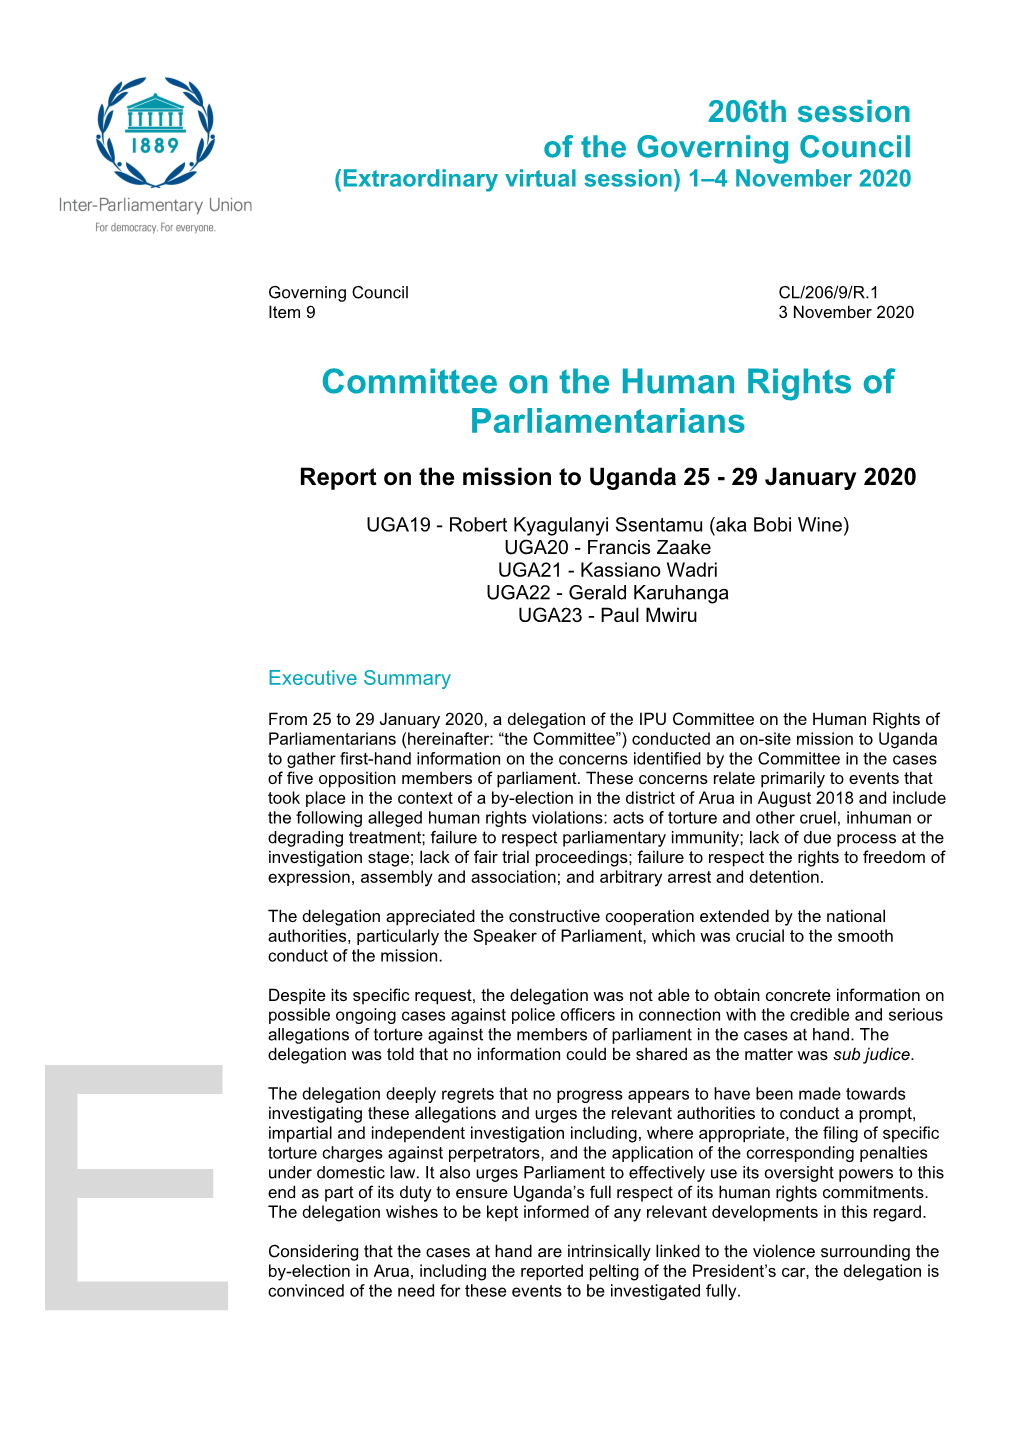 Committee on the Human Rights of Parliamentarians